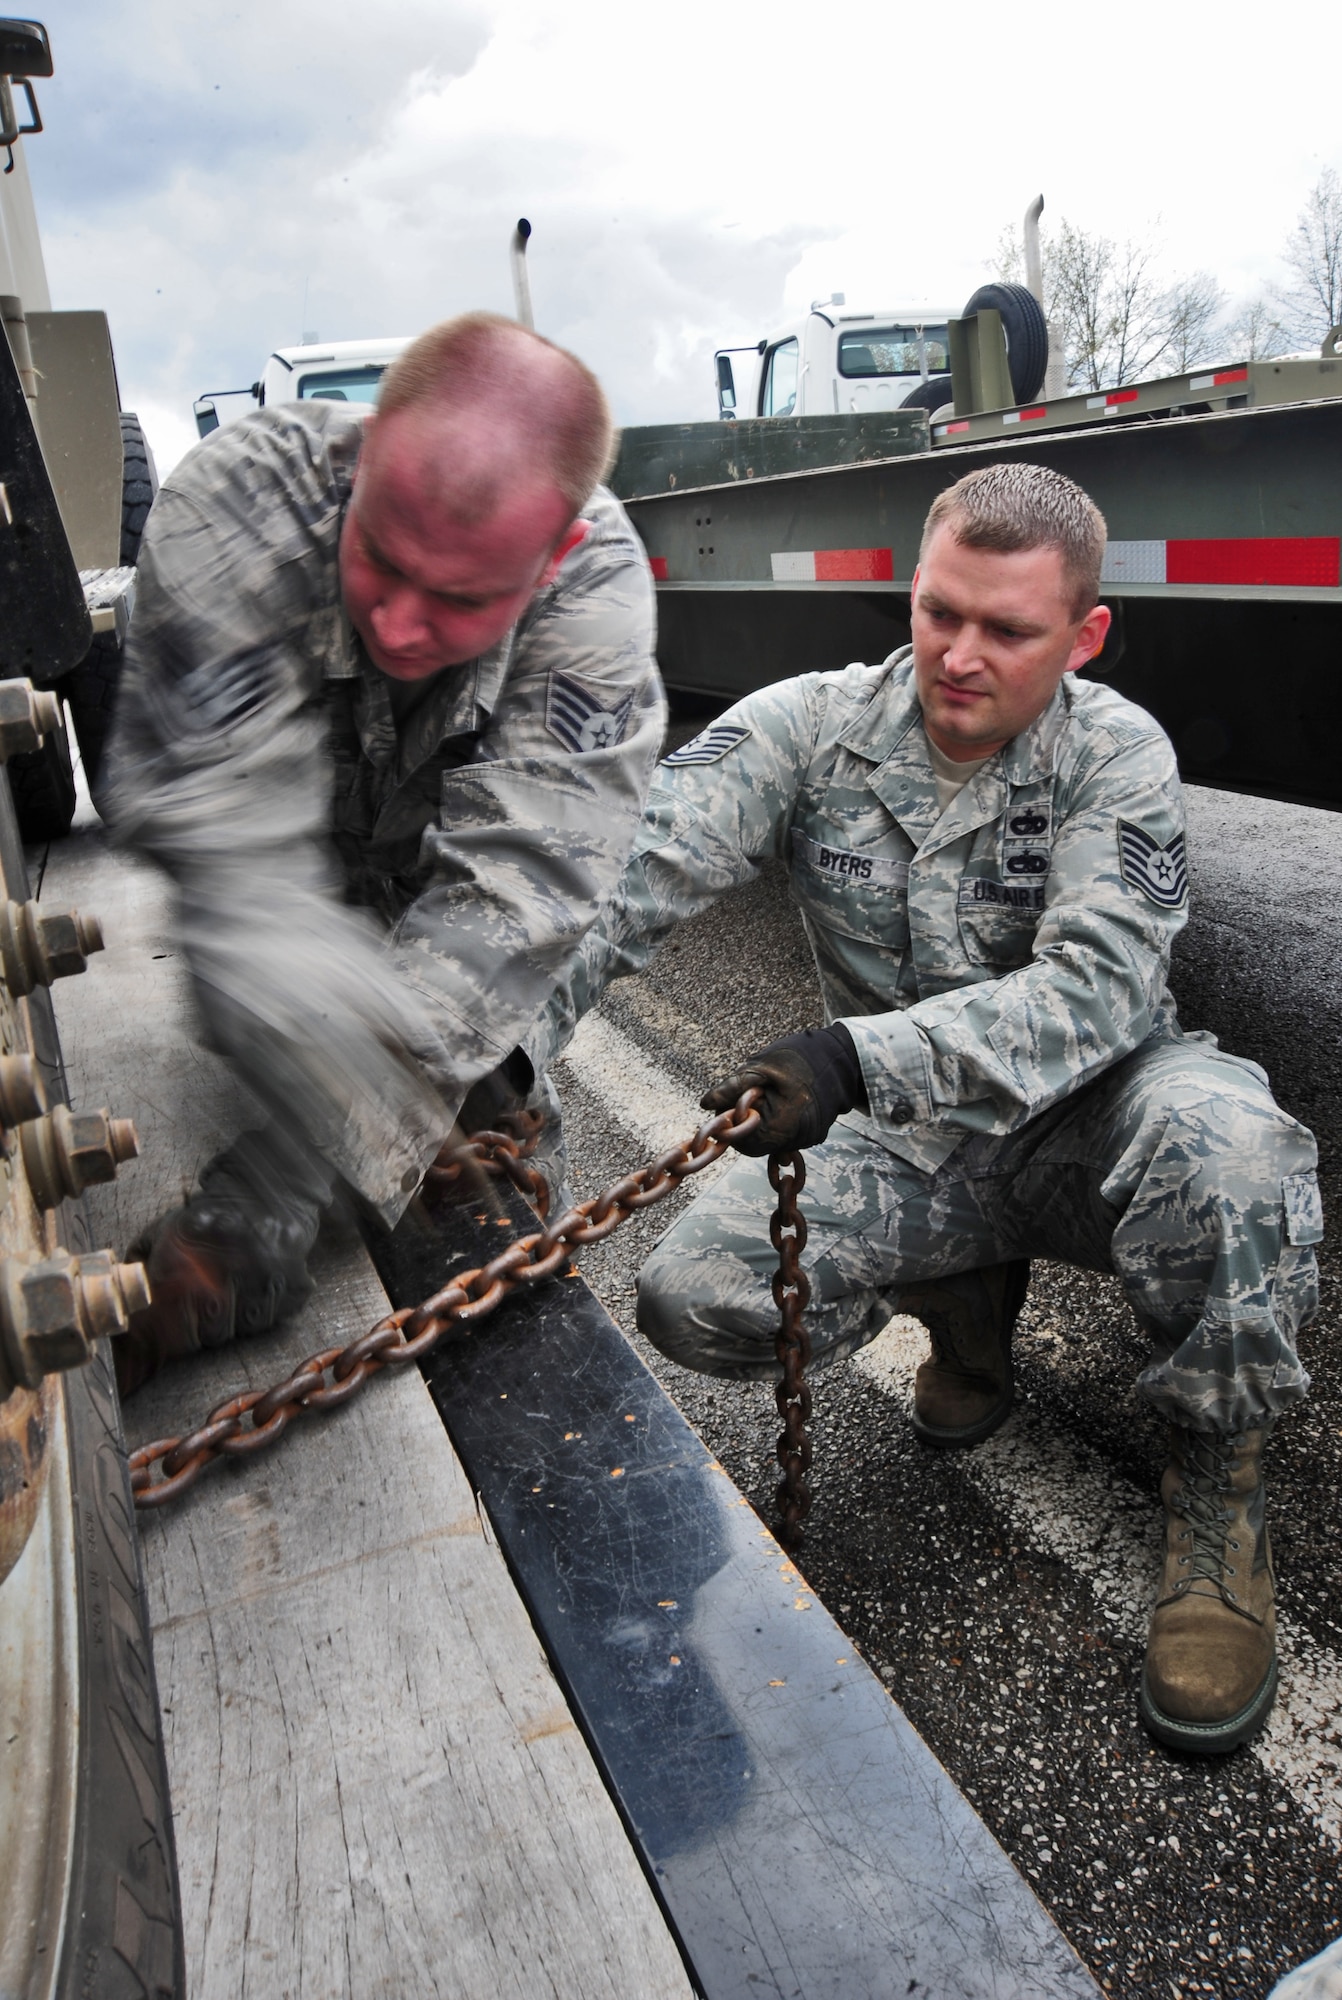 WHITEMAN AIR FORCE BASE, Mo. – Staff Sgt. Christopher Waters, 509th Logistics Readiness Squadron vehicle trainer, and Tech. Sgt. Jacob A. Byers, 509th Logistics Readiness Squadron NCO in charge of equipment support, chain down a government vehicle March 23. The chain prevents the vehicle from rolling off the trailer during travel, thus preventing damage to the vehicle, trailer and other drivers. (U.S. Air Force photo/Senior Airman Nick Wilson)